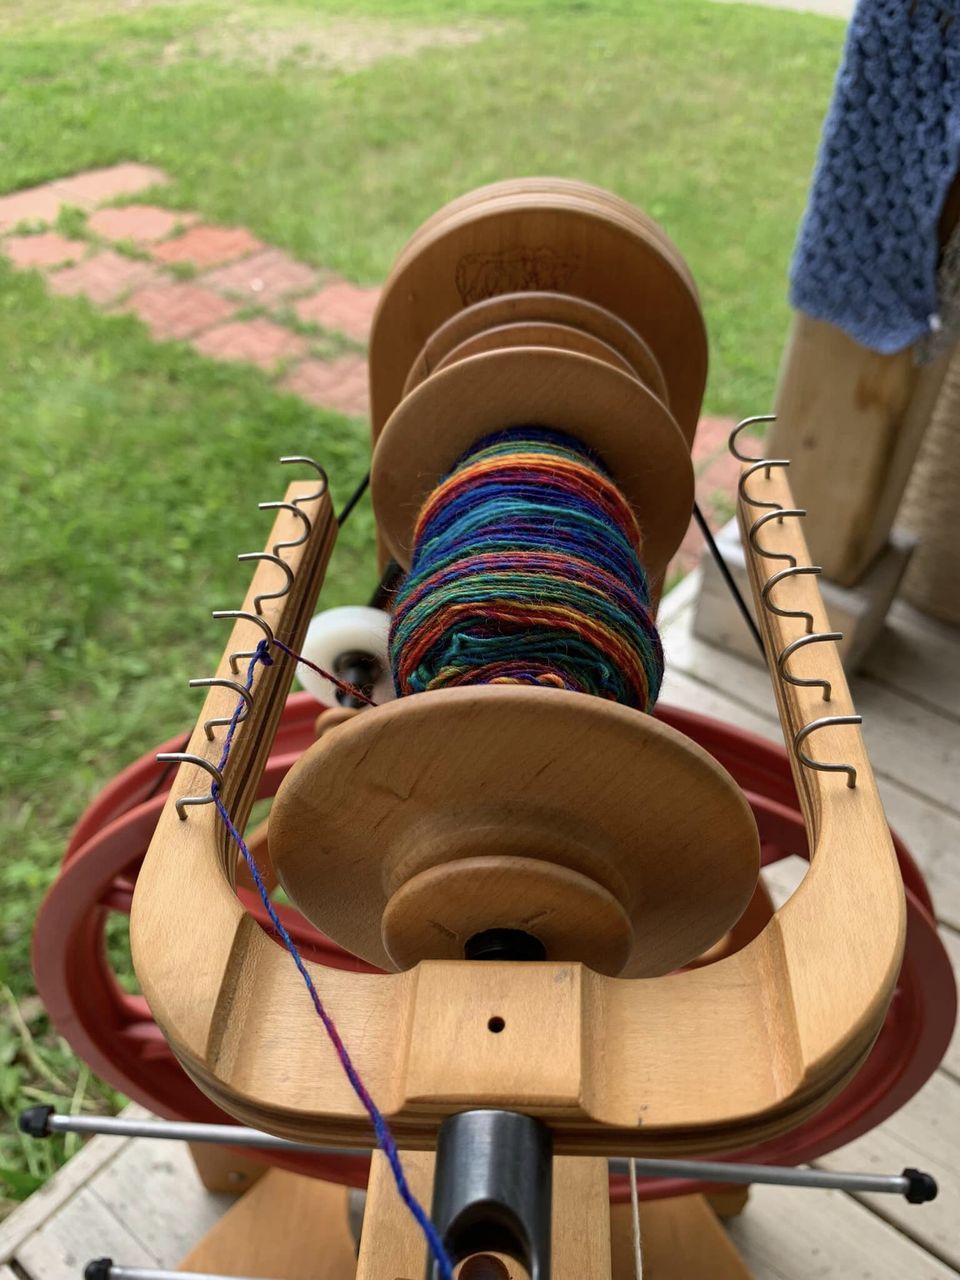 An image of colourful yarn being spun.